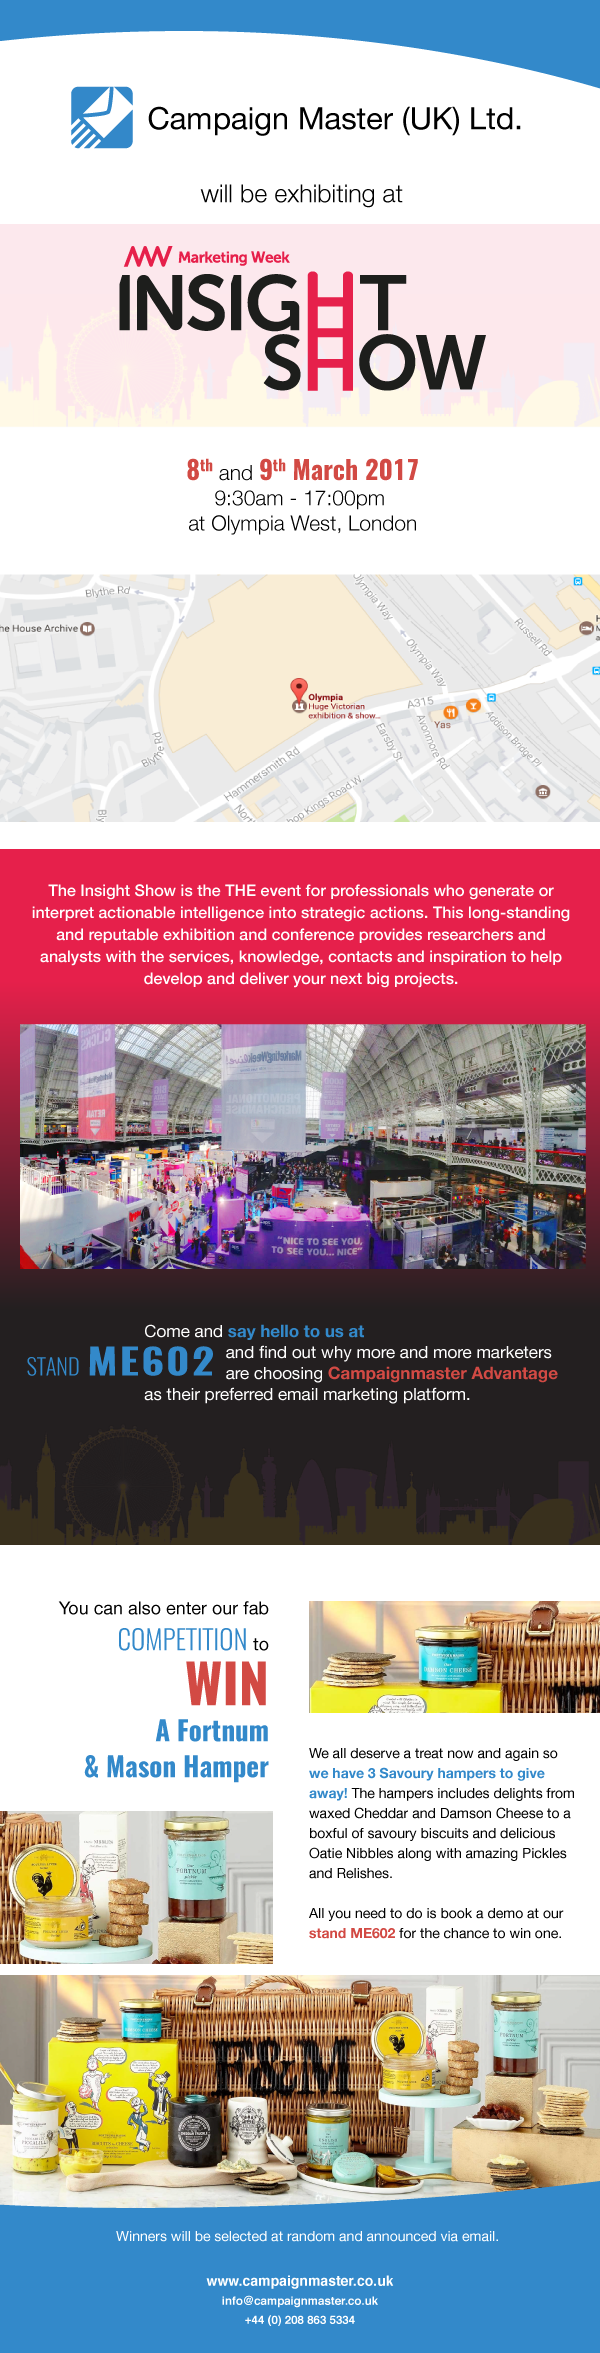 Campaign Master at Marketing Week Insight Show